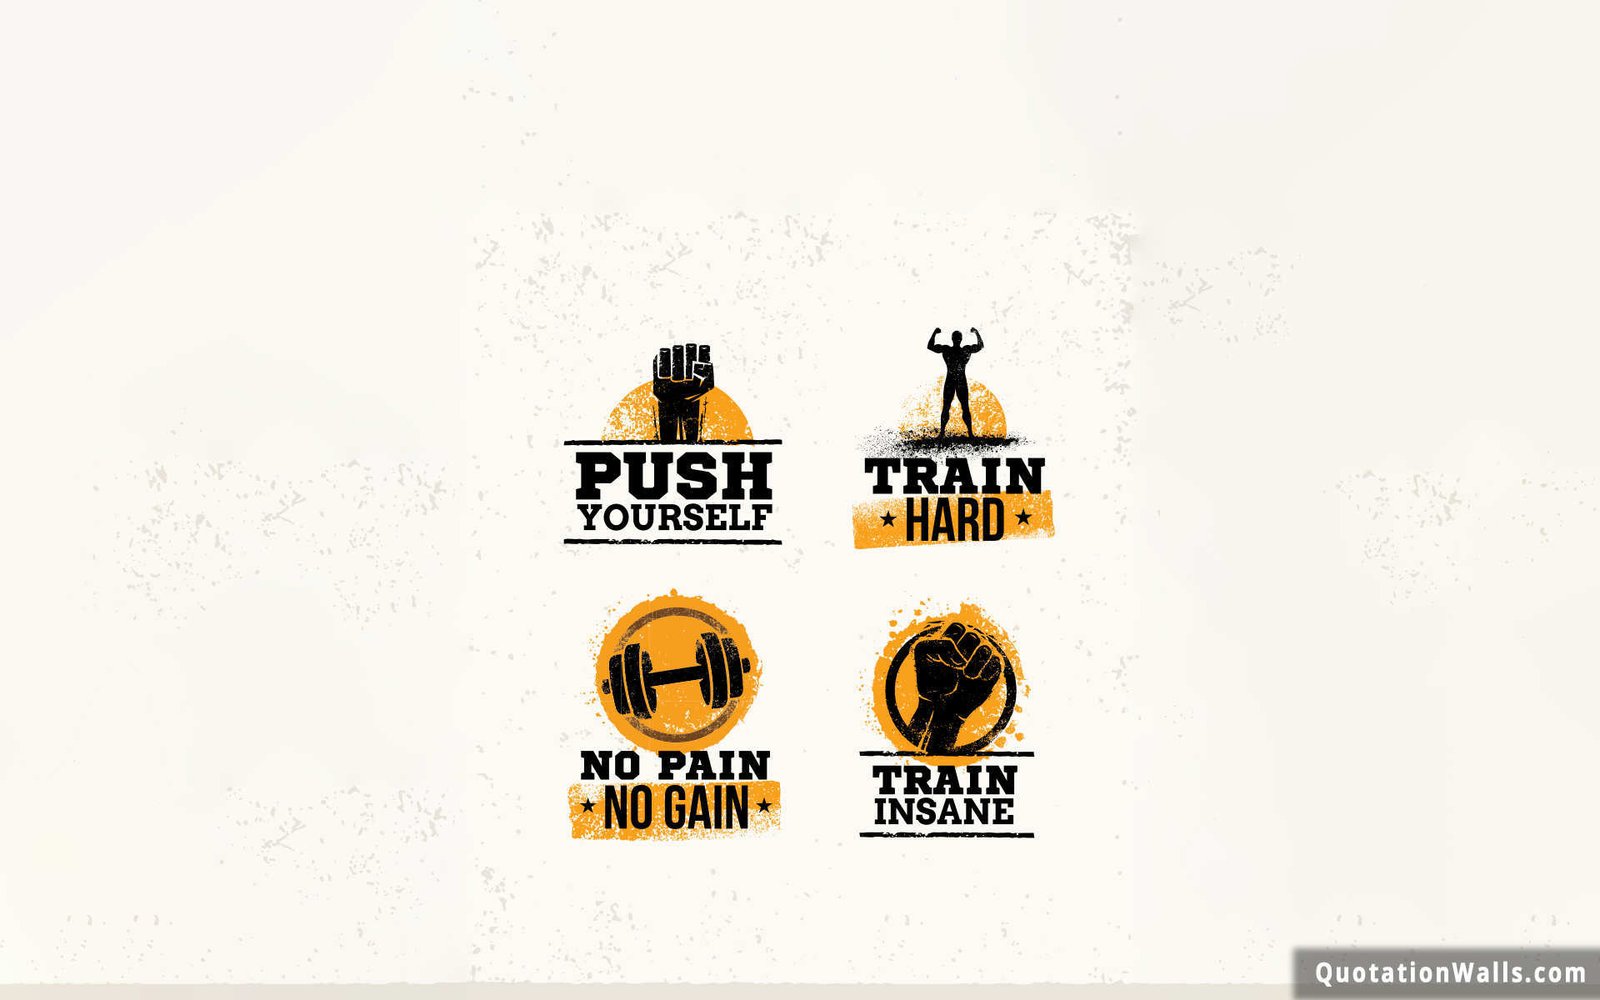 Gym Quotes Motivational Wallpaper for Mobile - QuotationWalls